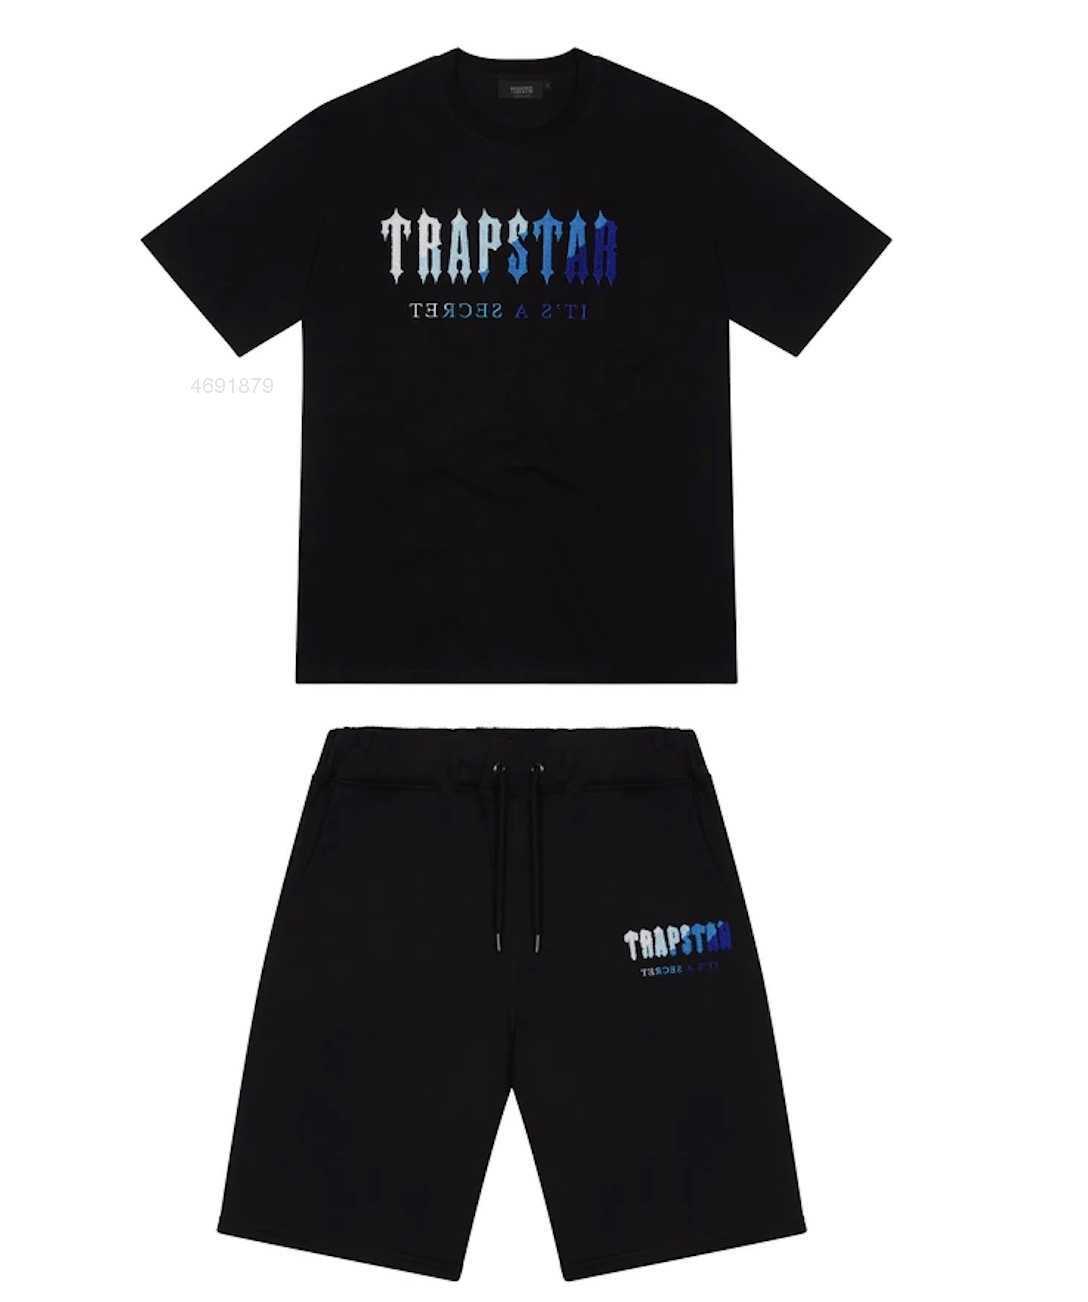 

Men's t Shirts Mens Trapstar t Shirt Short Sleeve Print Outfit Chenille Tracksuit Black Cotton London Streetwear s 2xlO55OO55O, 03